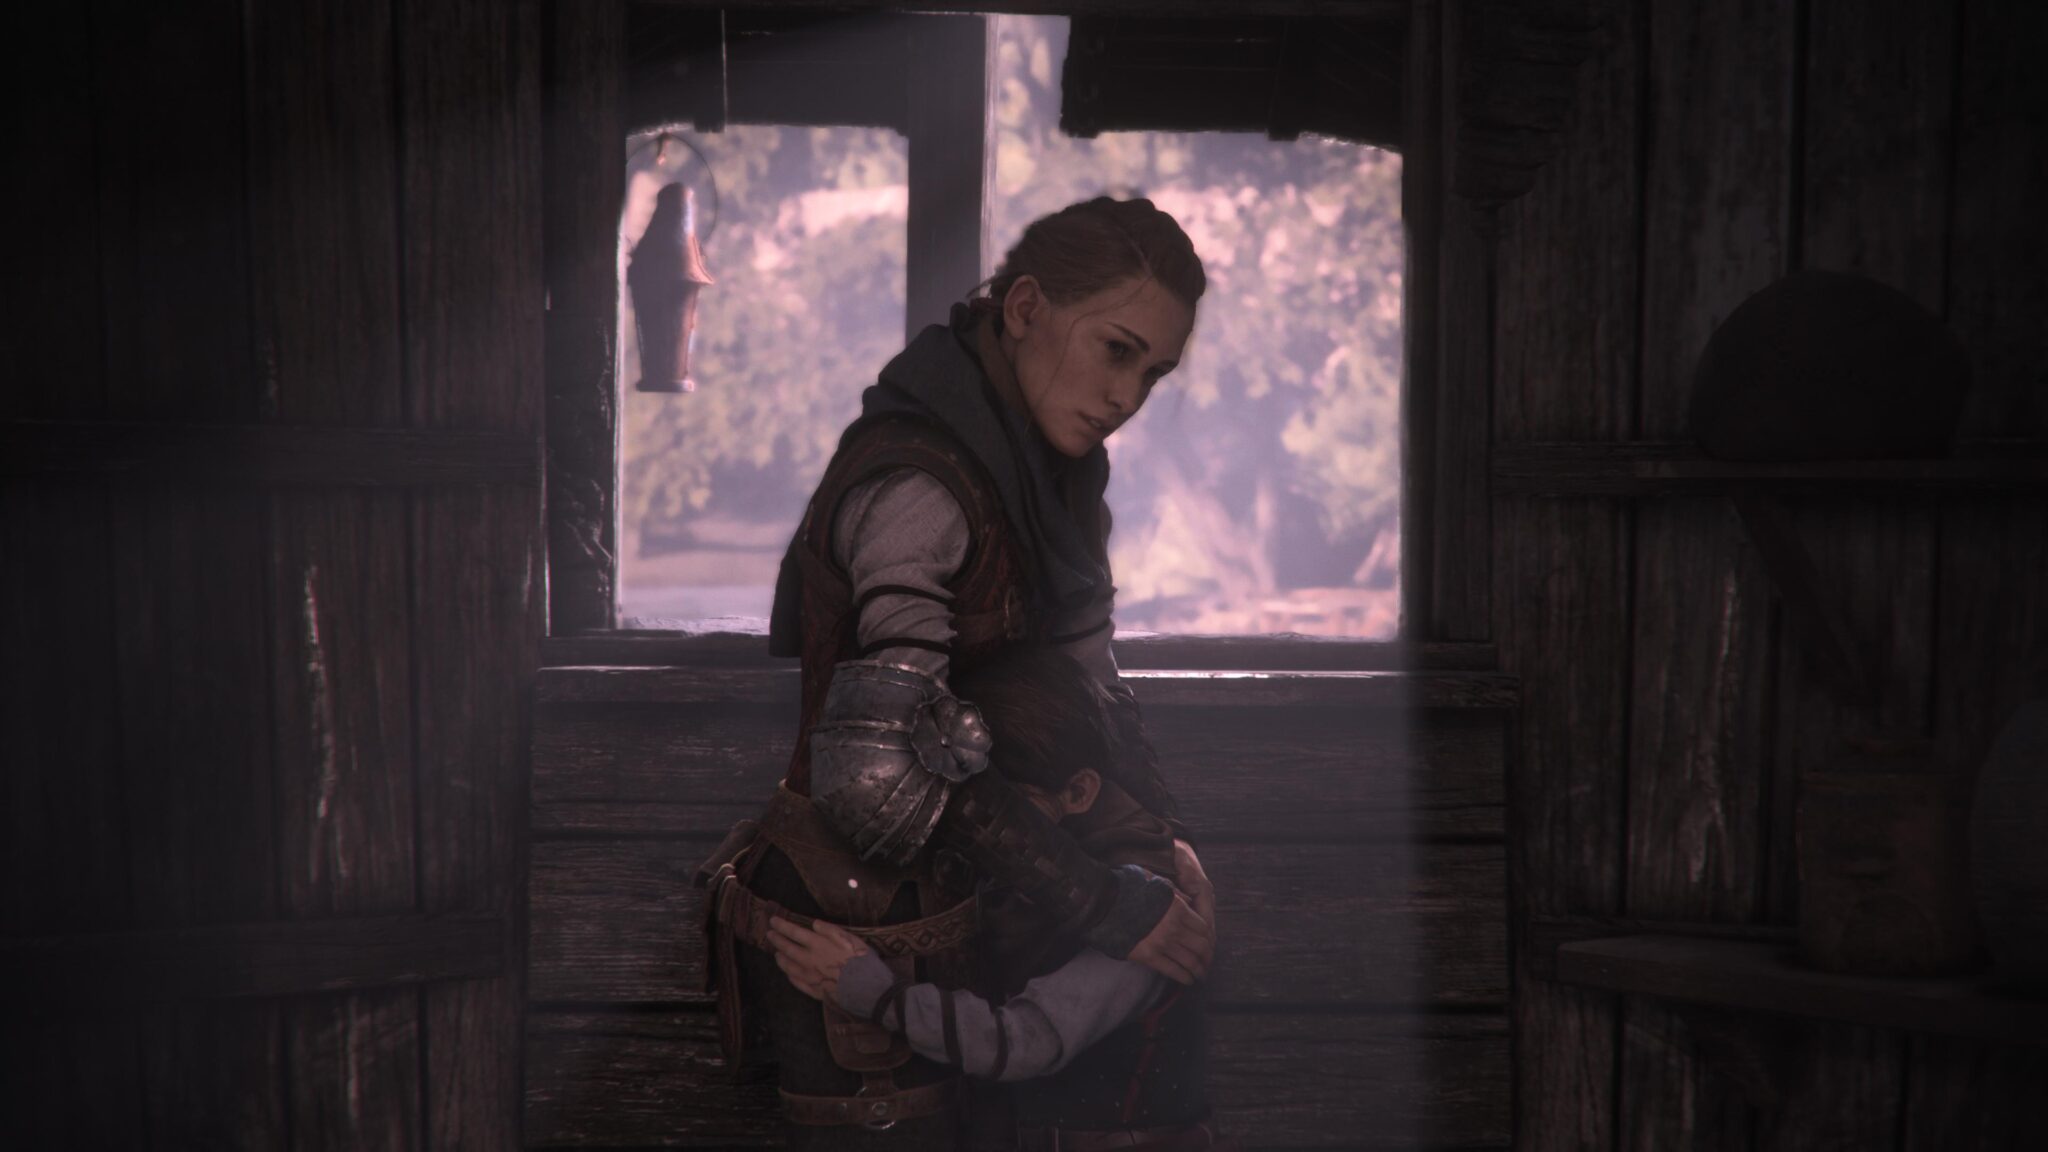 Games of 2022: A Plague Tale: Requiem provided the best big sister